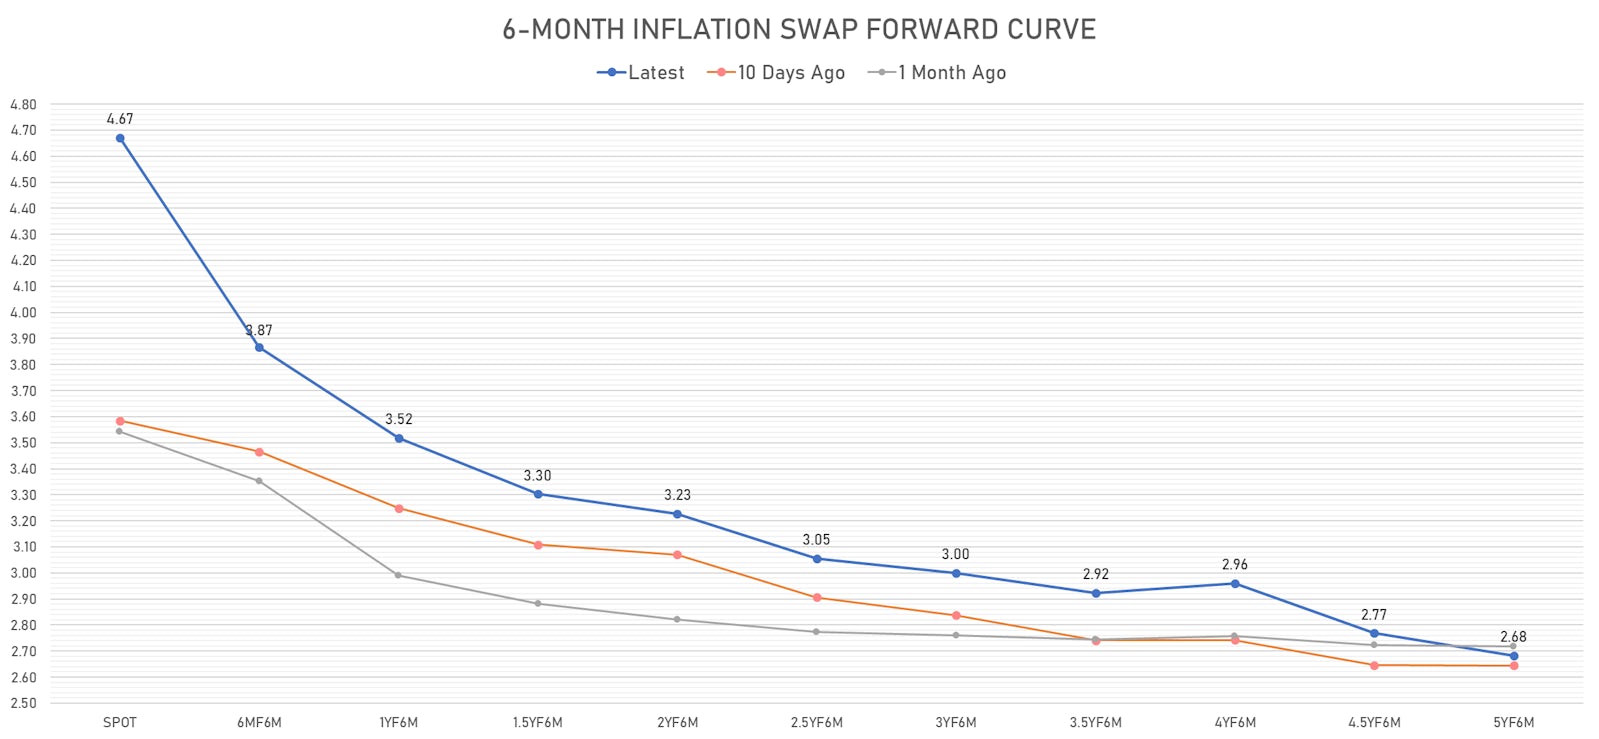 Recent Changes In The 6-Month US CPI Swap Forward Curve | Sources: ϕpost, Refinitiv data